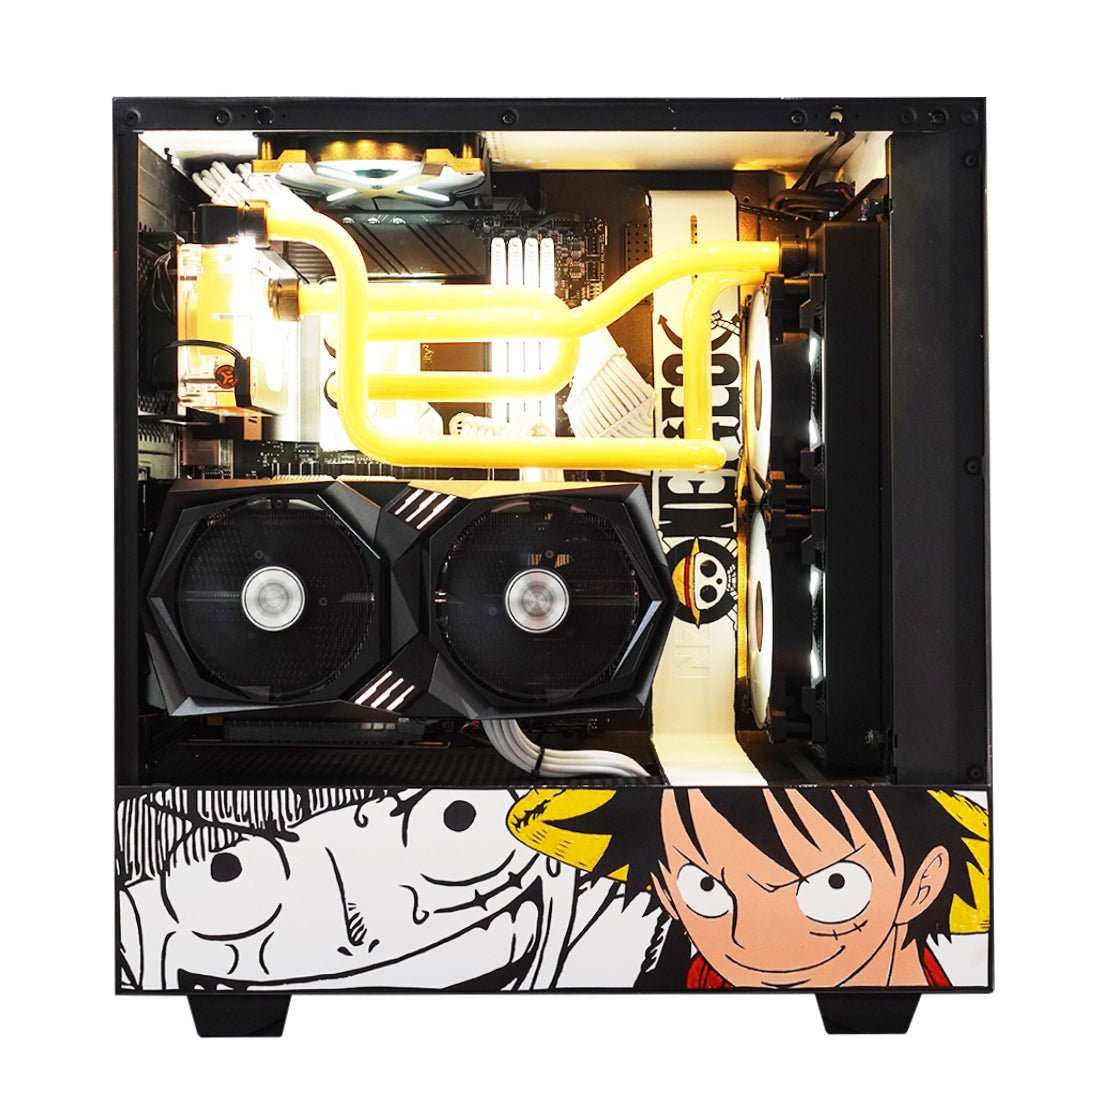 (Pre-Built) Gaming PC Intel Core i5-12600K w/ MSI RTX 3060 Gaming X & NZXT H510i - One Piece Edition - Store 974 | ستور ٩٧٤